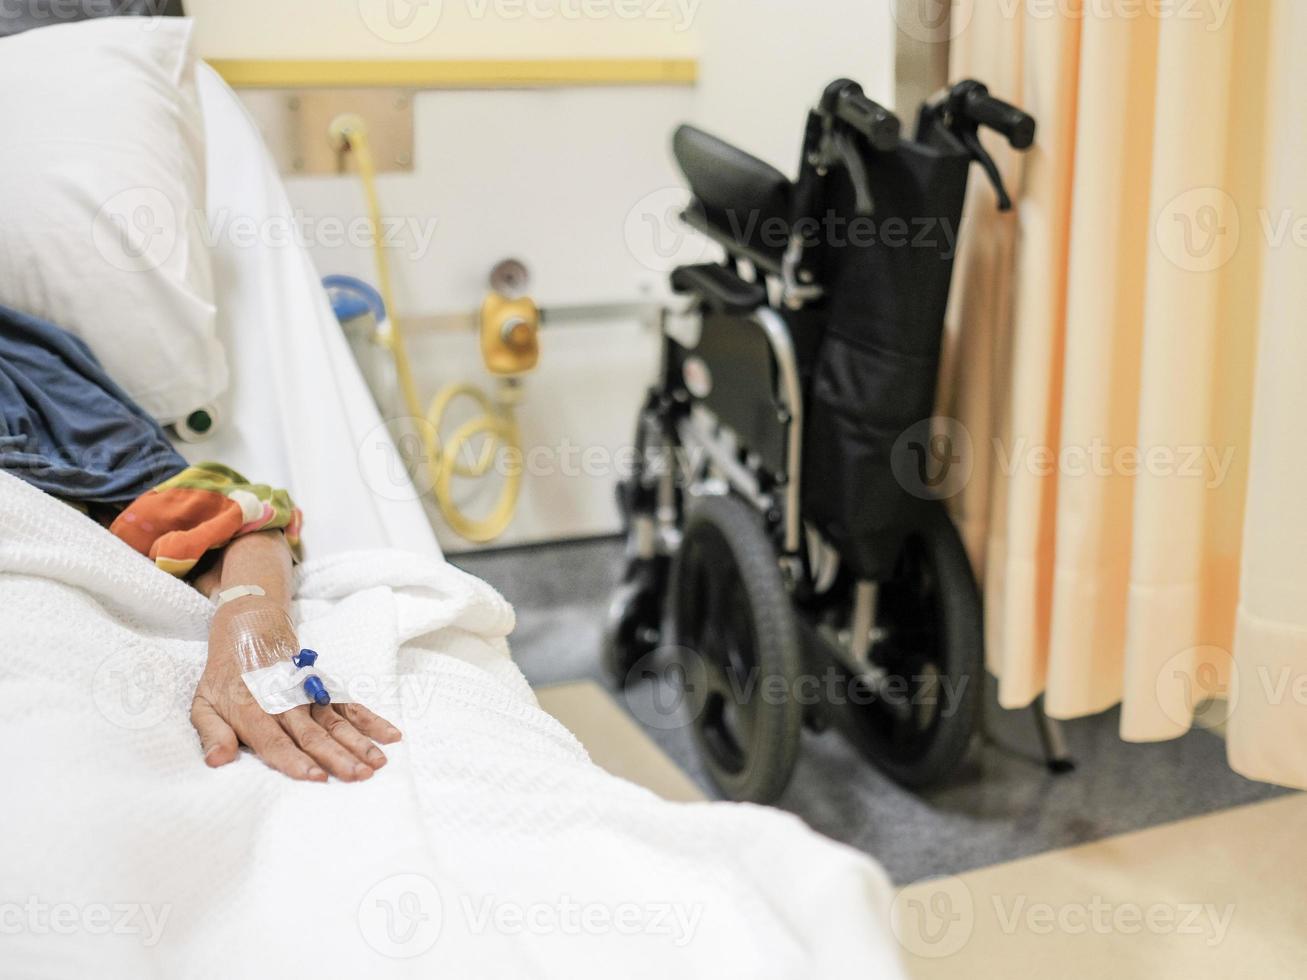 A patient resting on the hospital bed receiving medical care photo